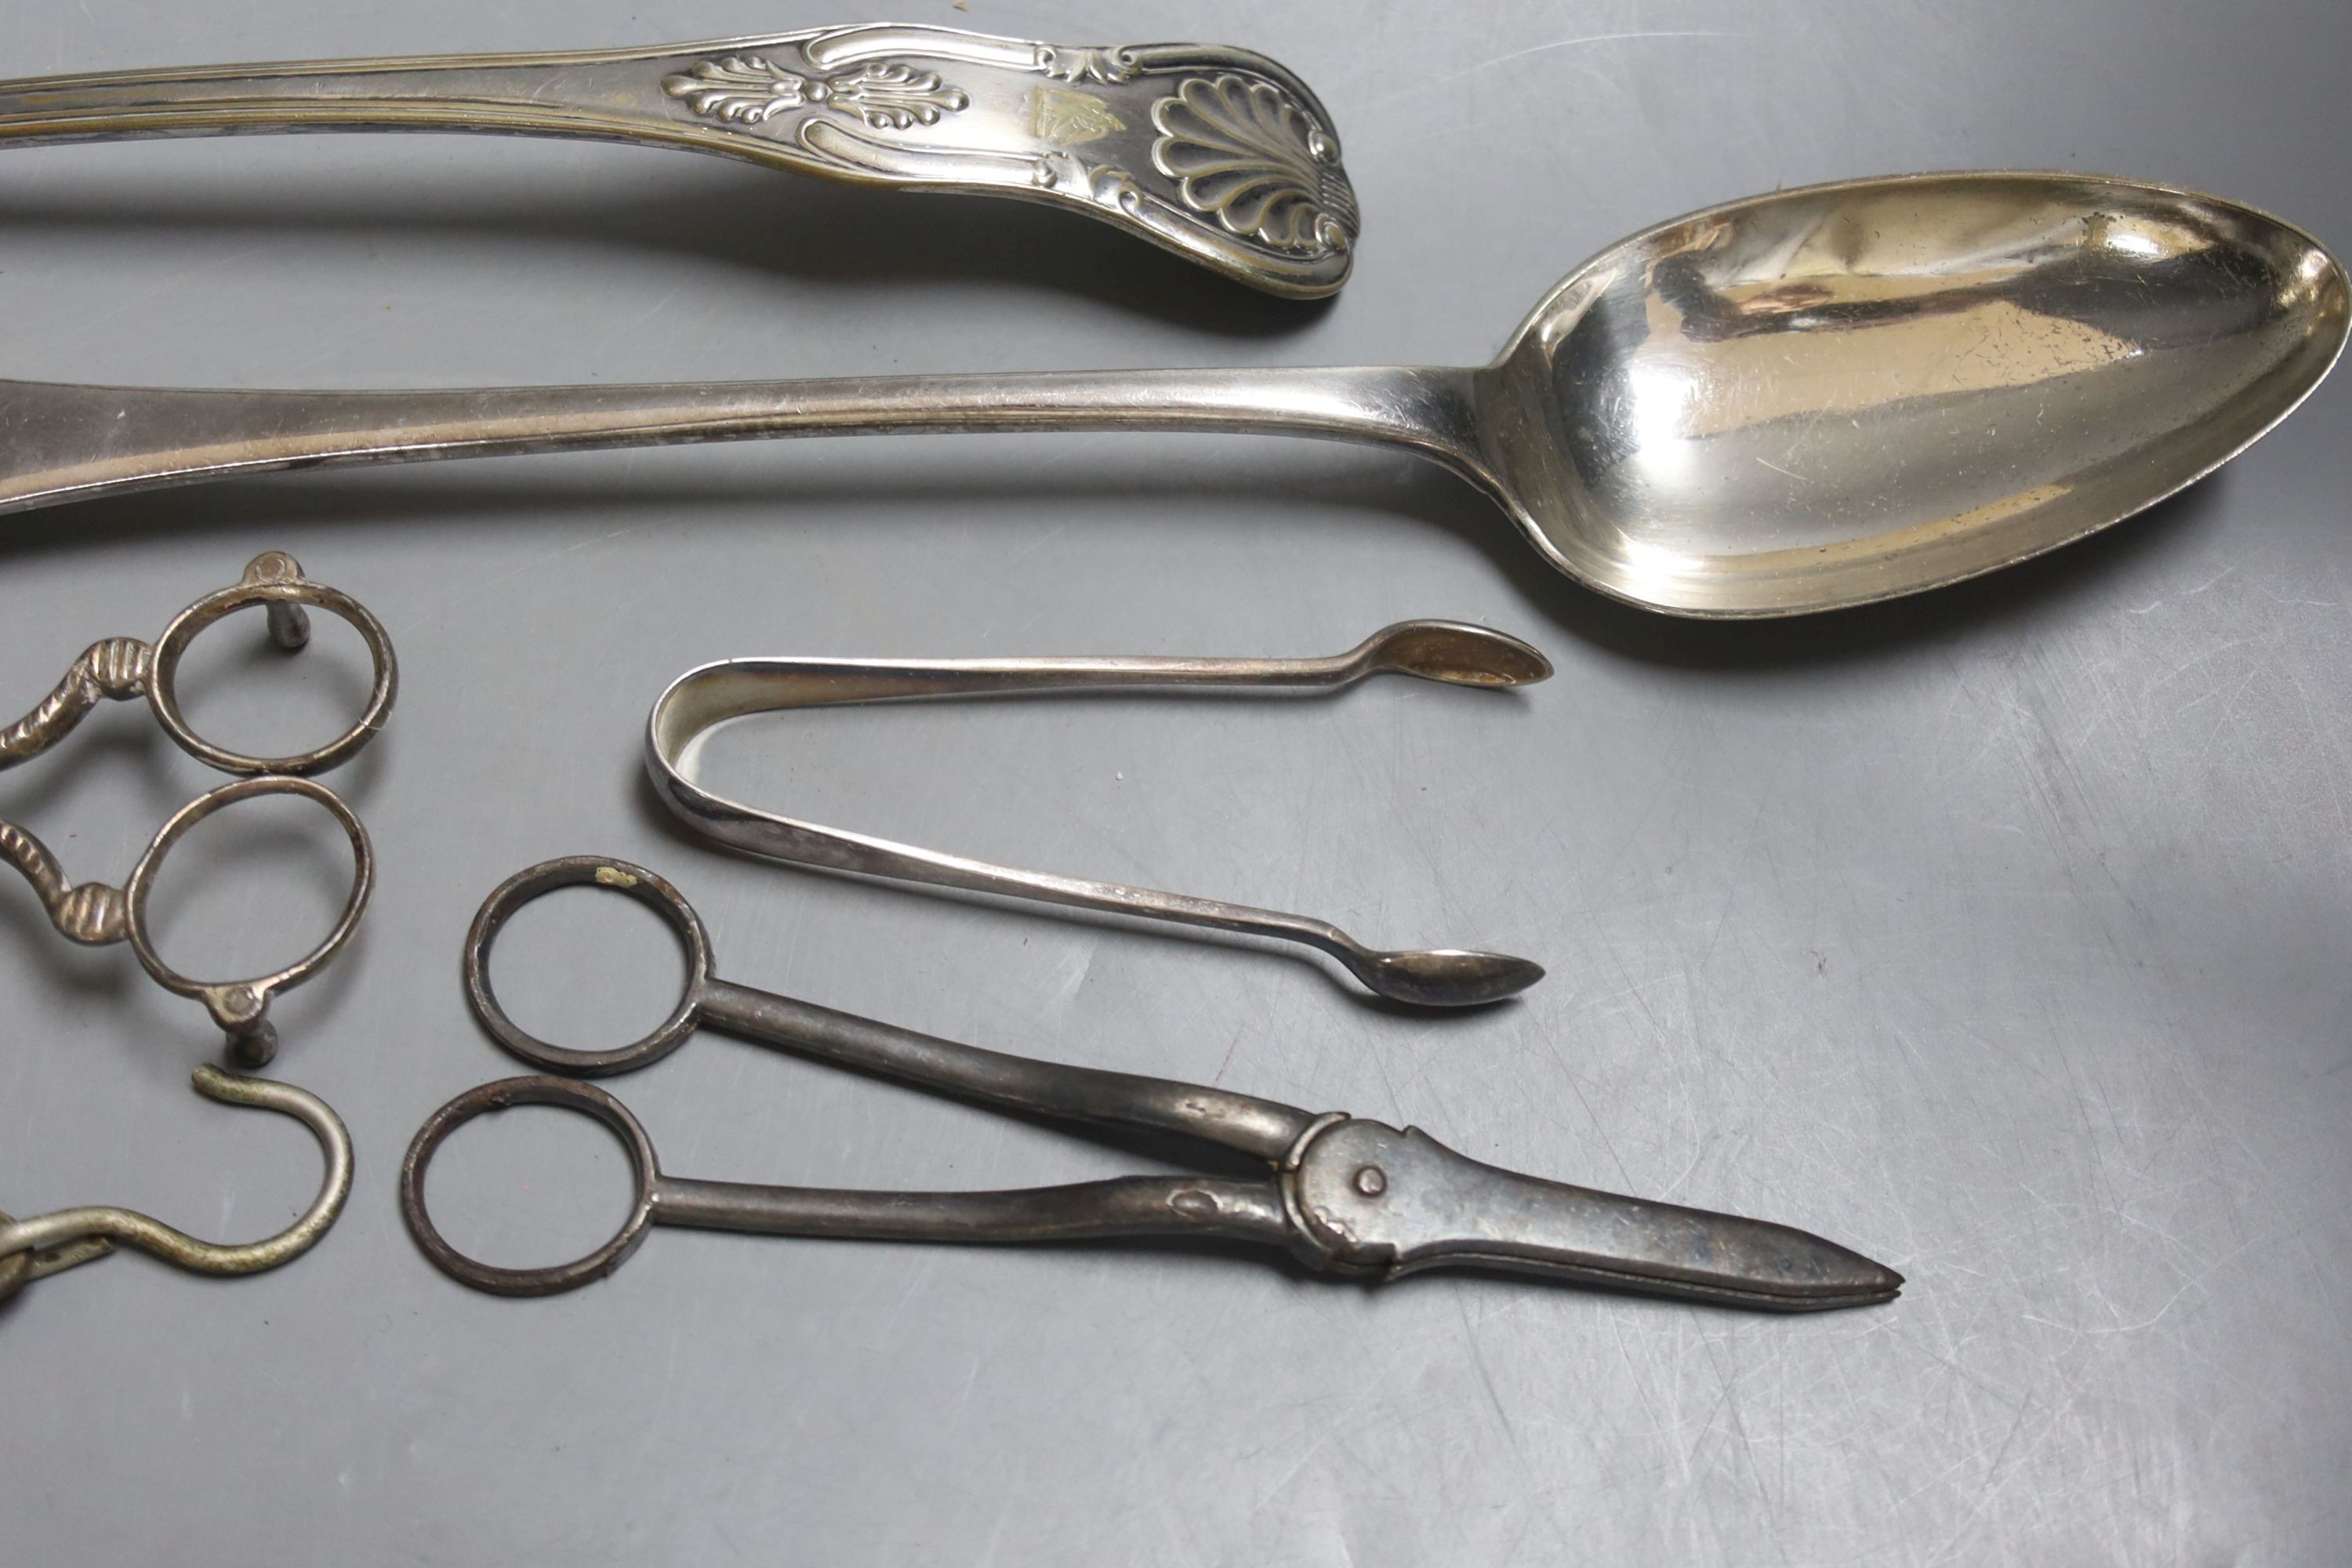 A large plated ladle and basting spoon, two candle snuffers, tongs and spring balance